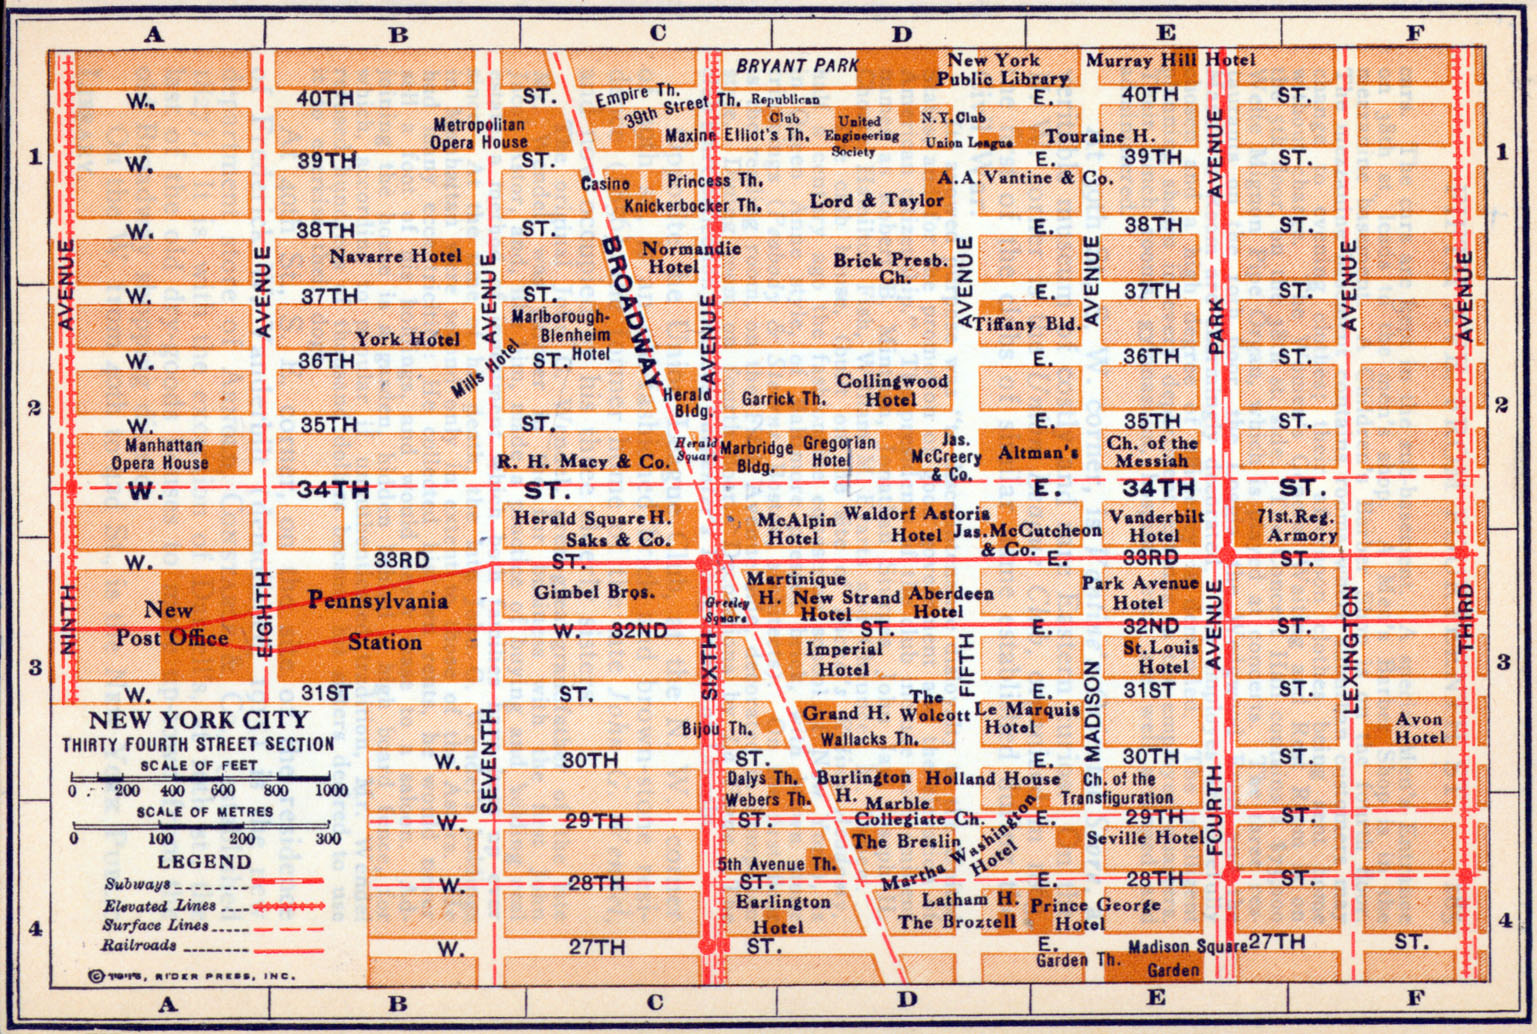 New York Maps  PerryCasta\u00f1eda Map Collection  UT Library Online